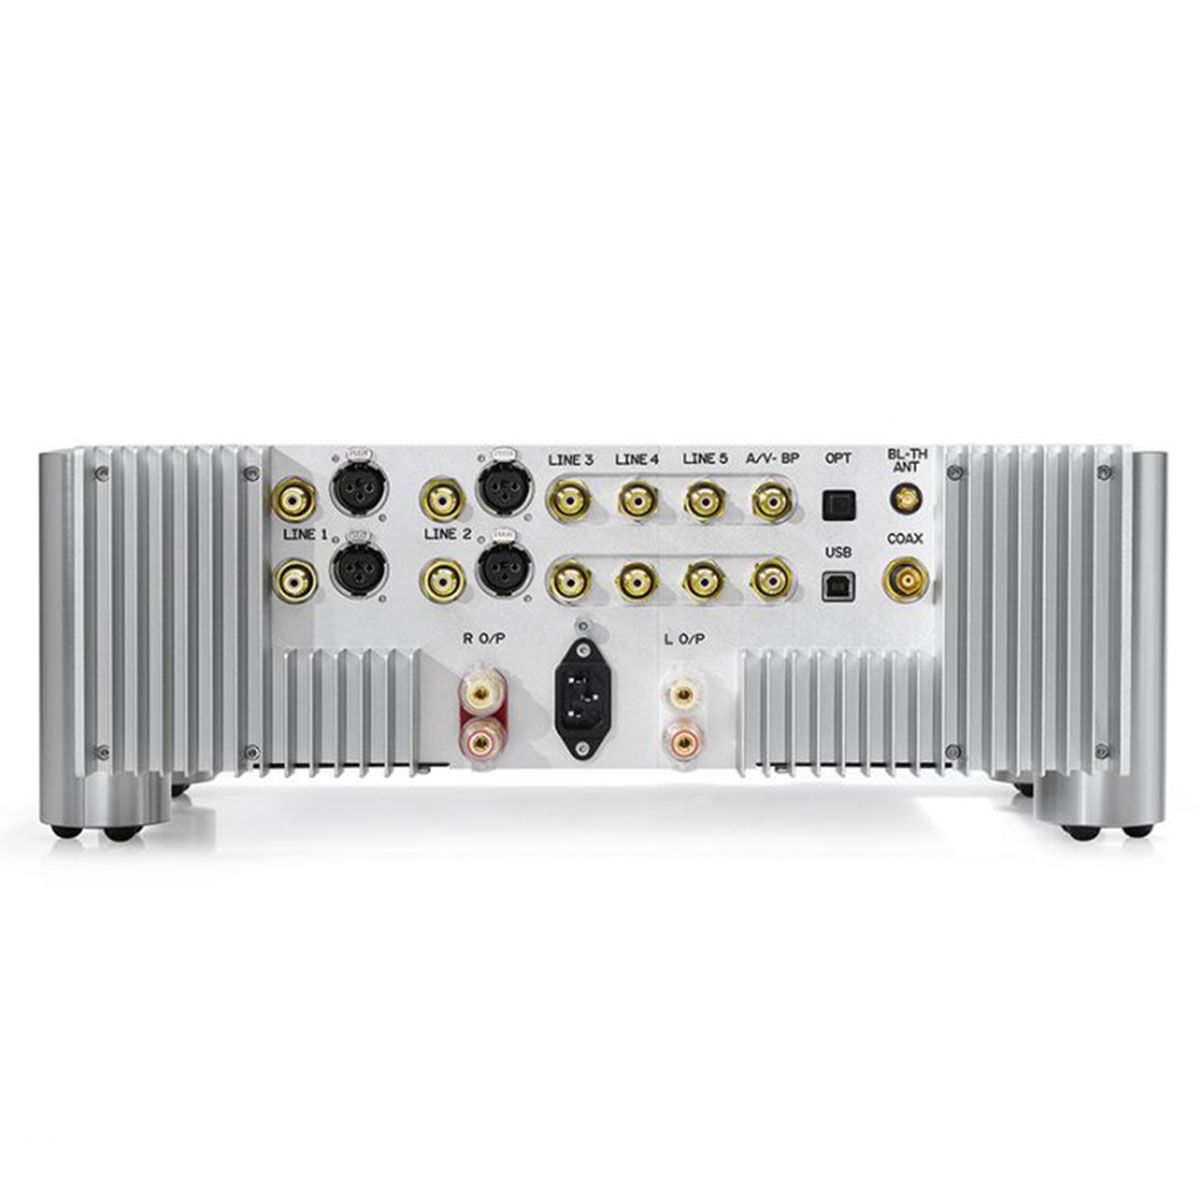 Back view Chord Electronics CPM 2800 MKII 120W Integrated Amplifier - Silver